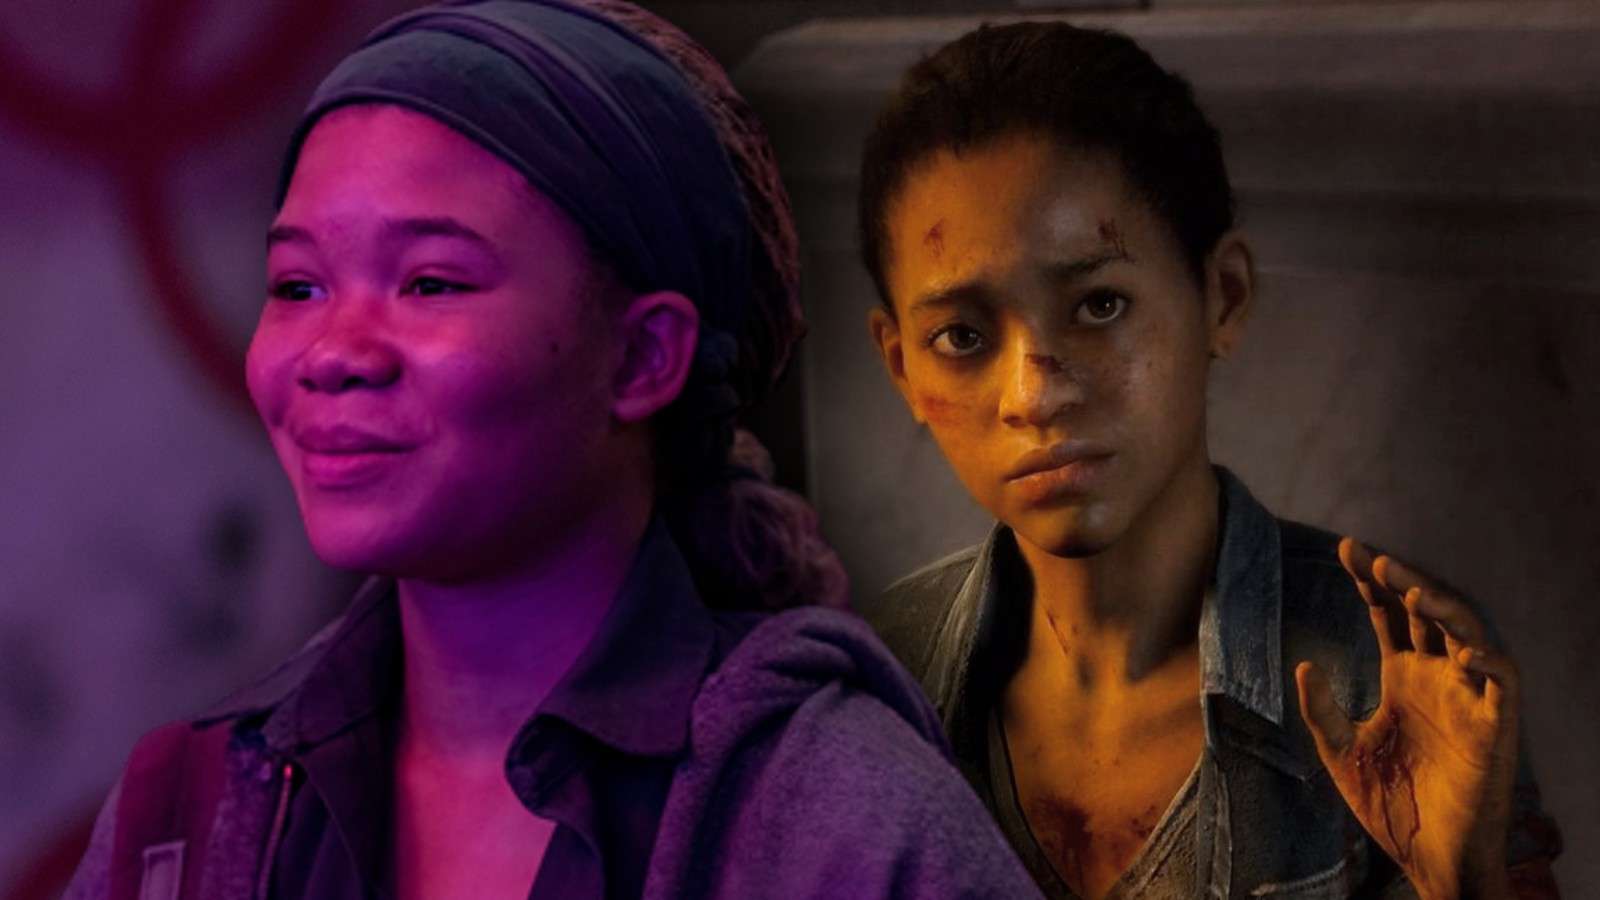 Riley in The Last of Us Episode 7 and the Left Behind game DLC